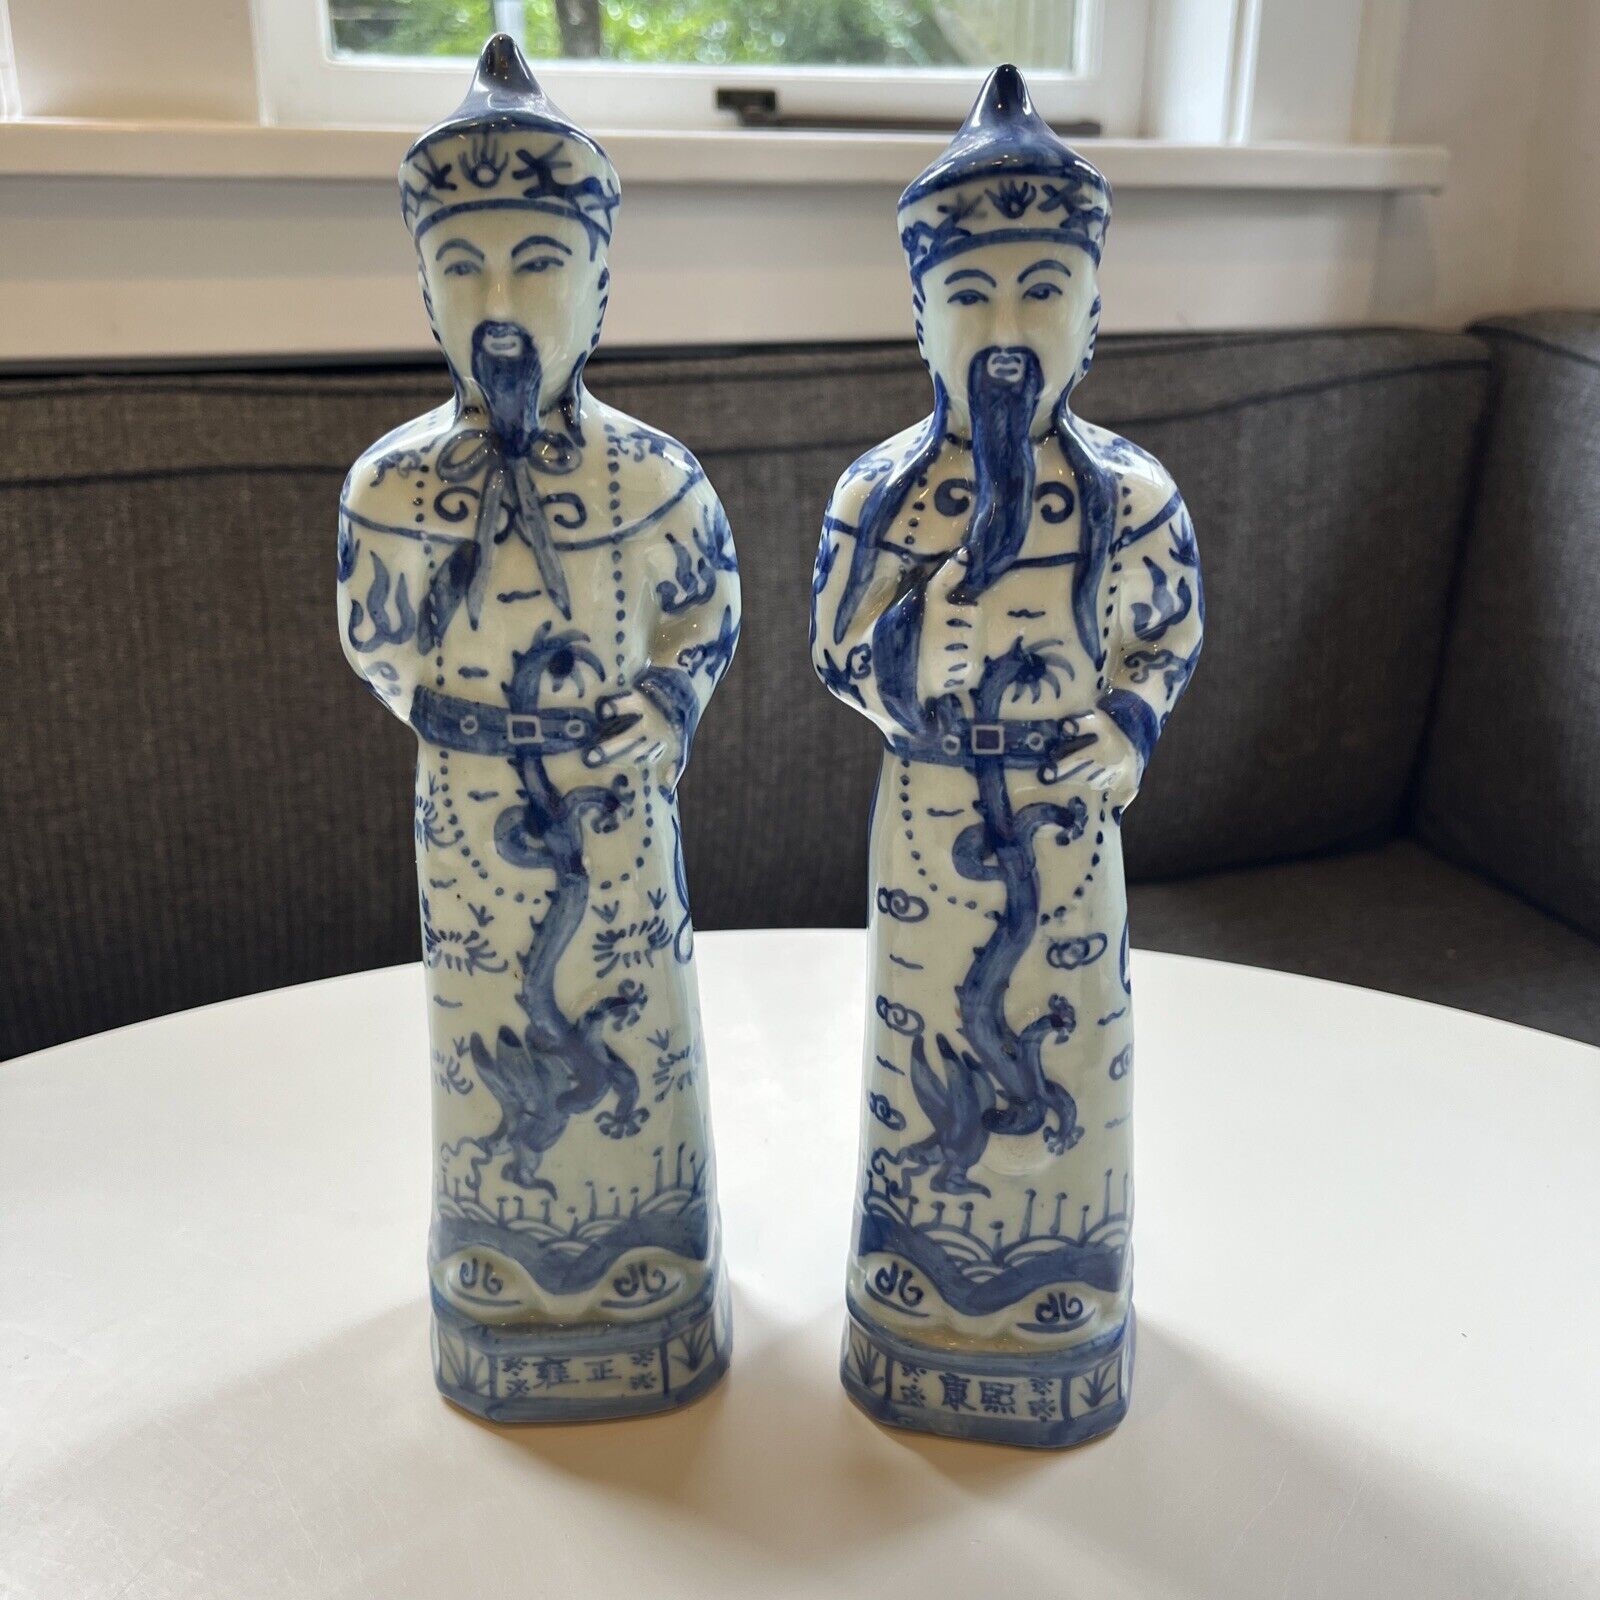 Pair Of Vtg Chinese Emperor Figurines White + Blue Ceramic Statues Chinoiserie